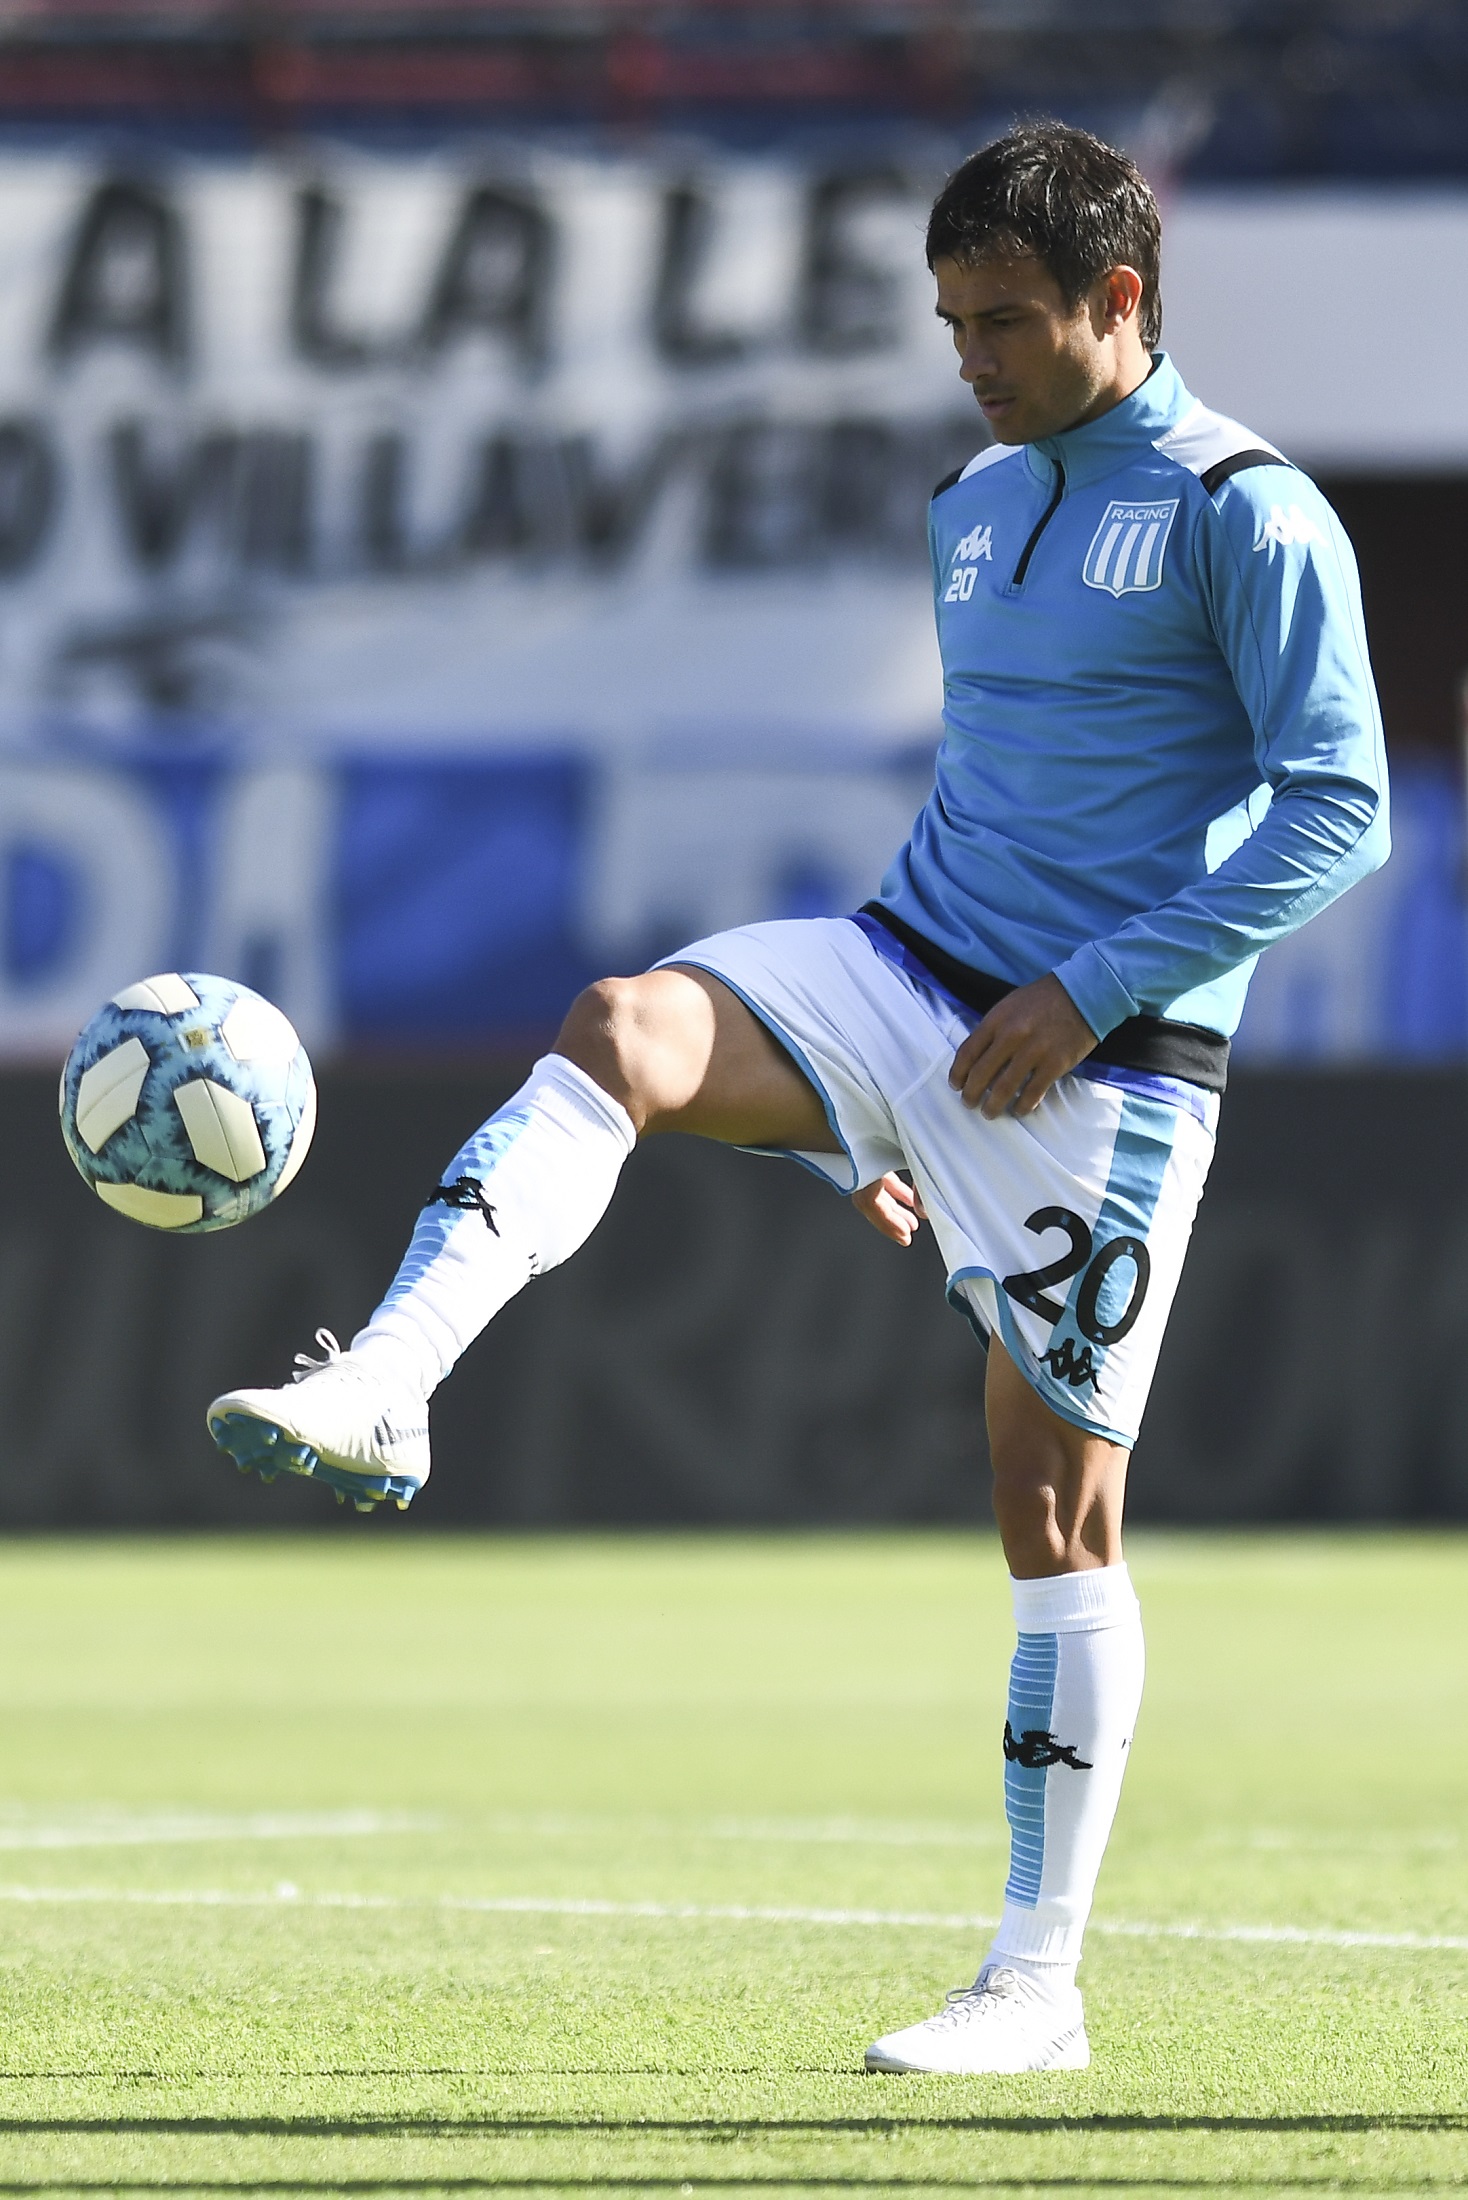 BUENOS AIRES, ARGENTINA - FEBRUARY 22: Dario Cvitanich of Racing Club kicks the ball during warmups pior a match between San Lorenzo and Racing Club as part of Superliga 2019/20 at Estadio Pedro Bidegain on February 22, 2020 in Buenos Aires, Argentina. (Photo by Rodrigo Valle/Getty Images)